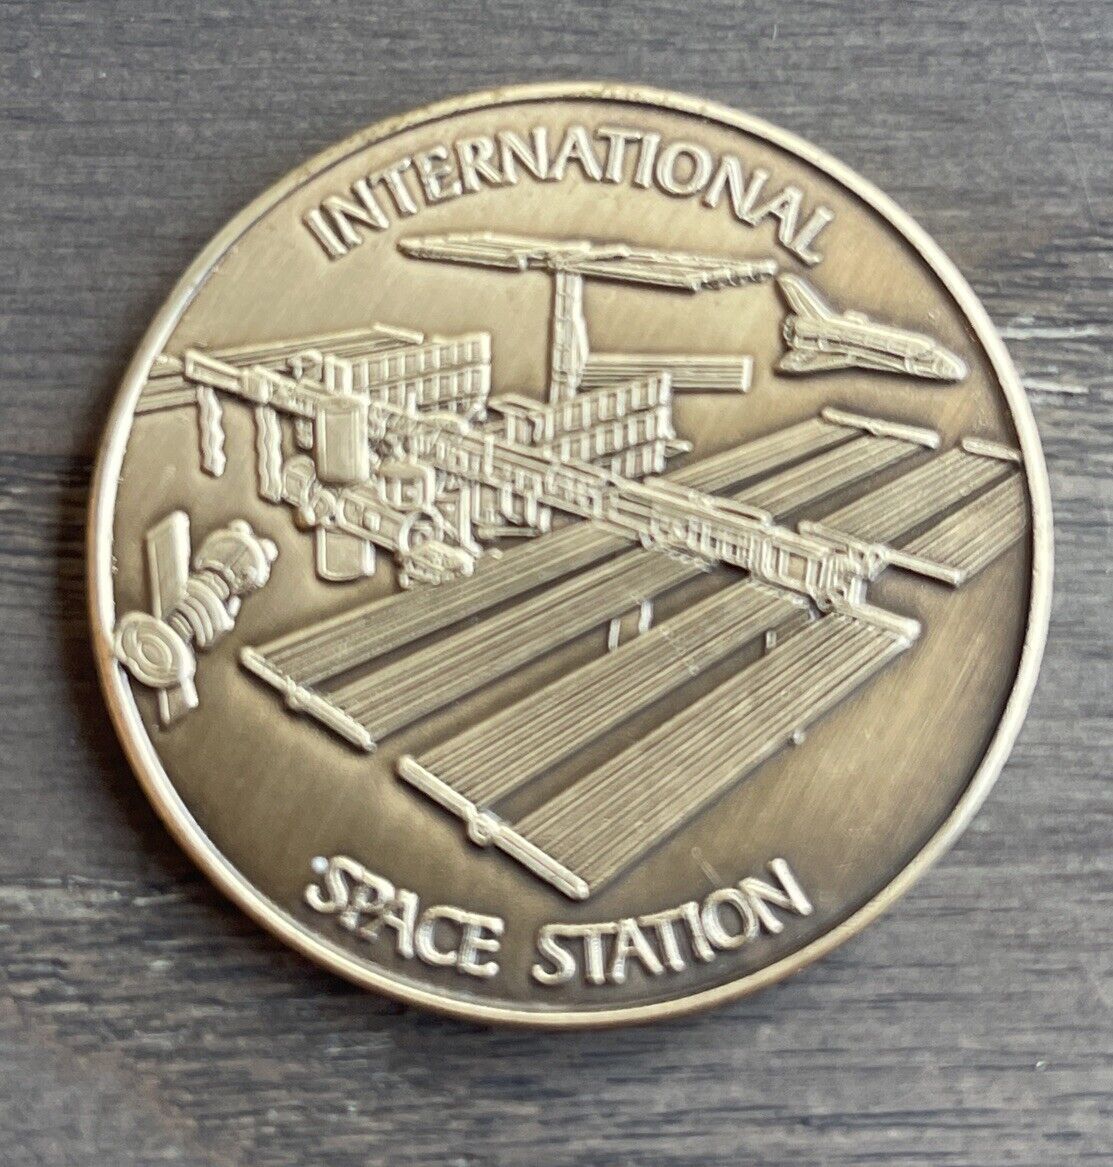 NASA COIN MEDALLION ISS International Space Station Coin